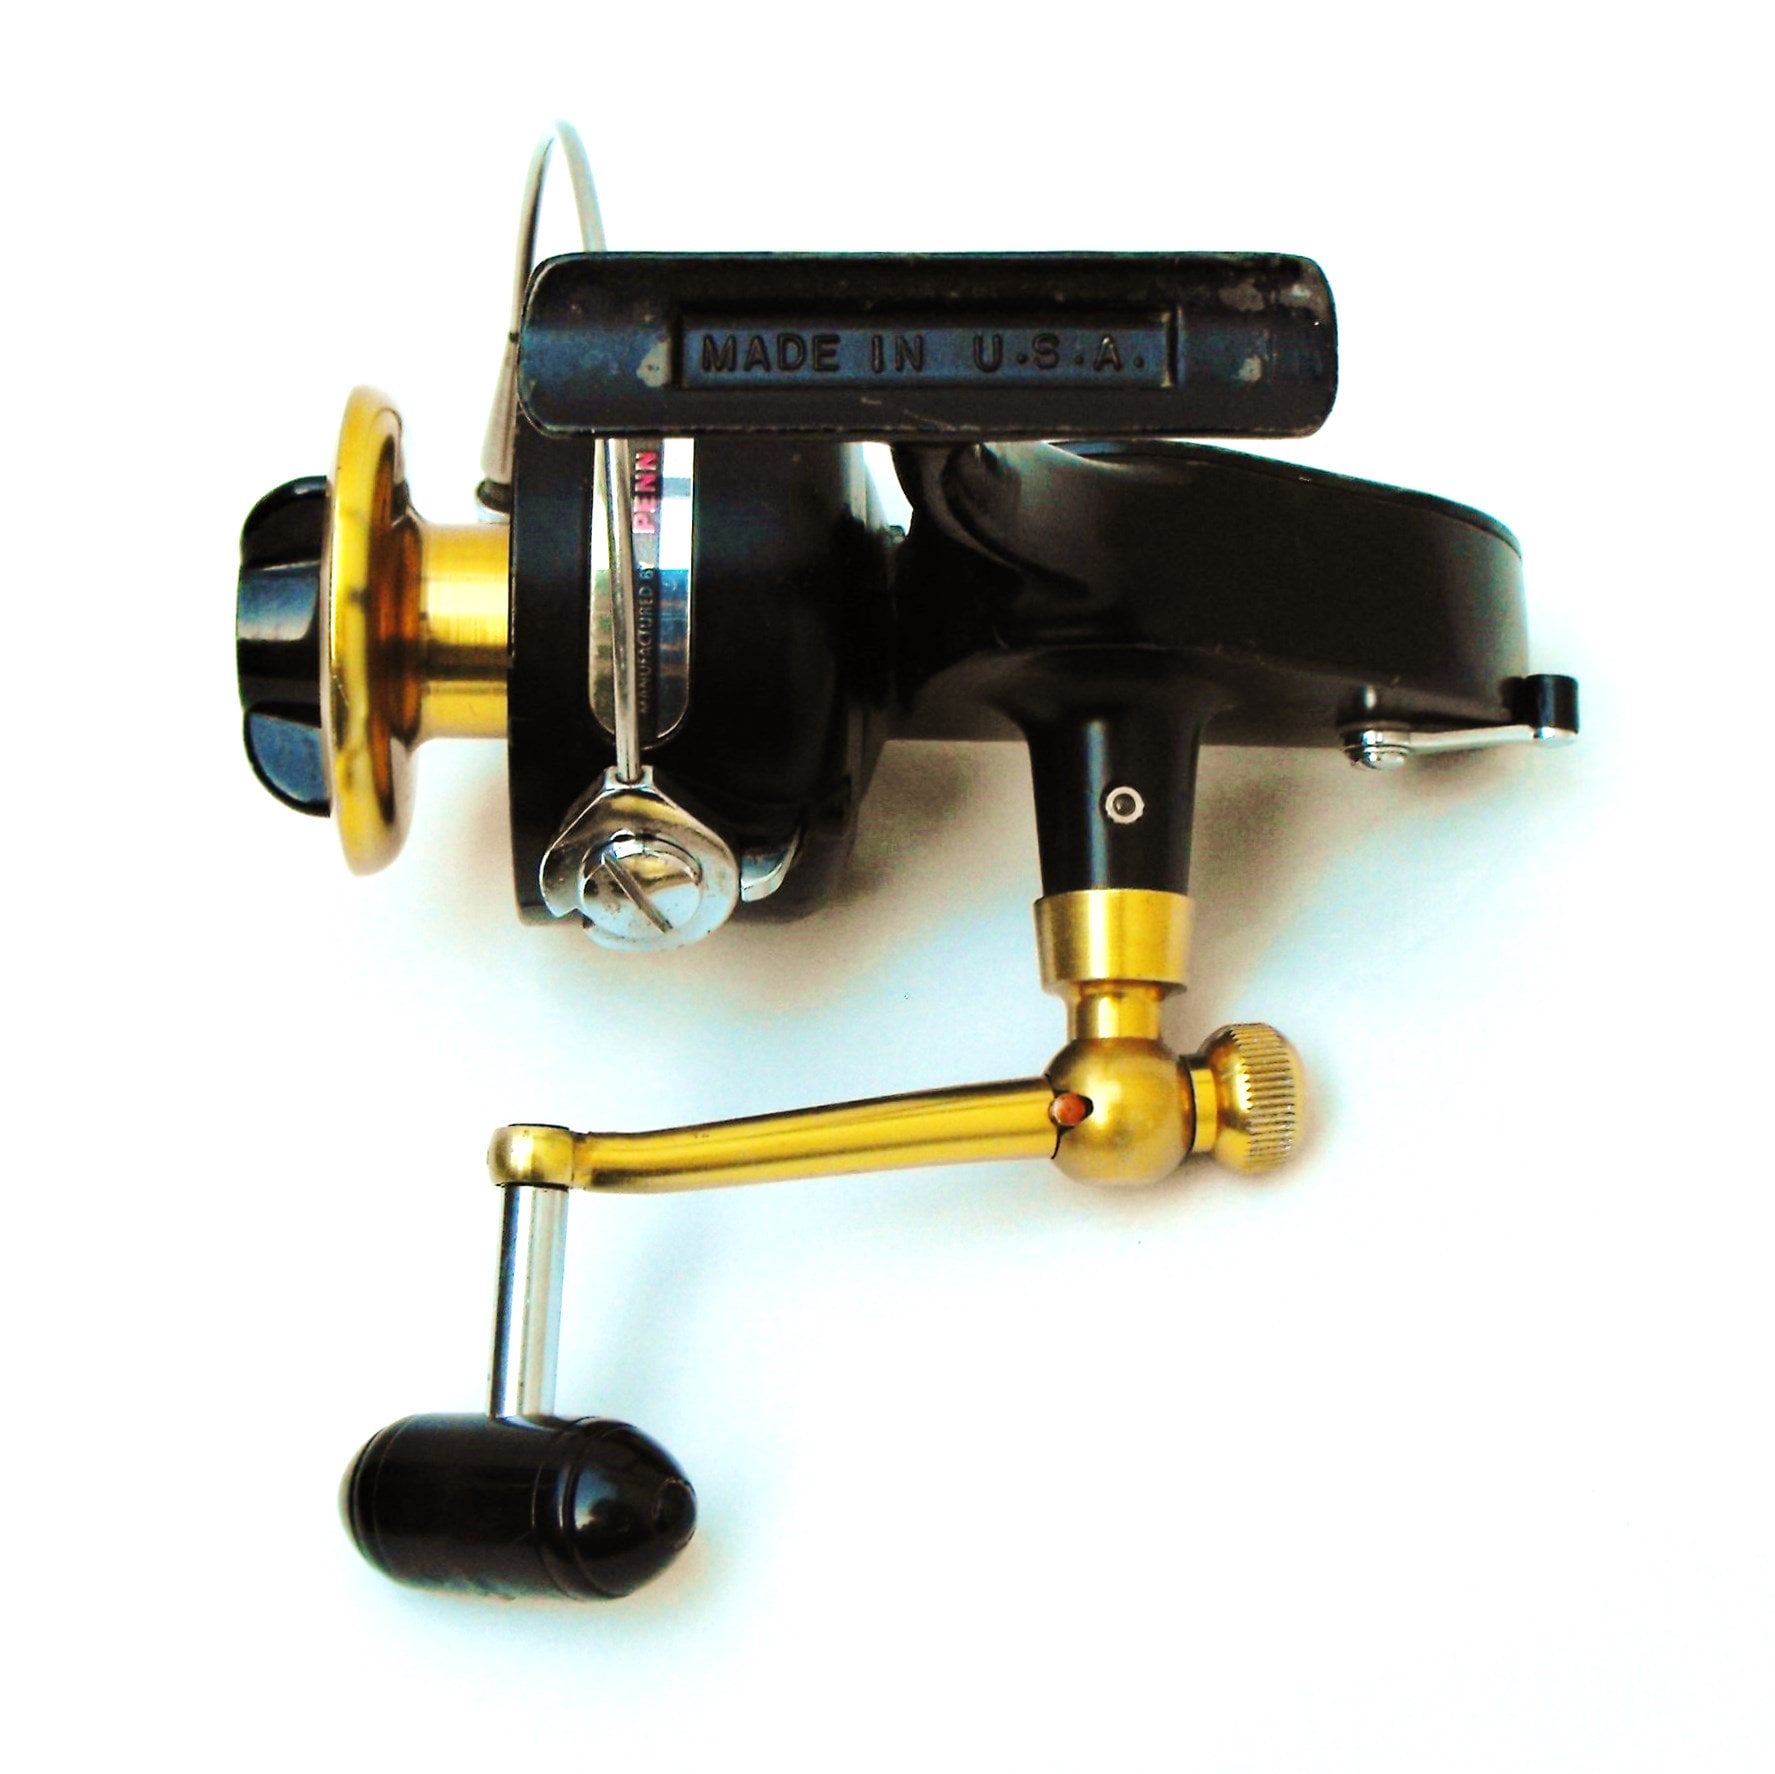 Vintage Penn 712Z Black and Gold Power Drag Spinning Reel Made in USA,  1970's Saltwater Spinfisher, Excellent Fishing Reel, Angler Gift 